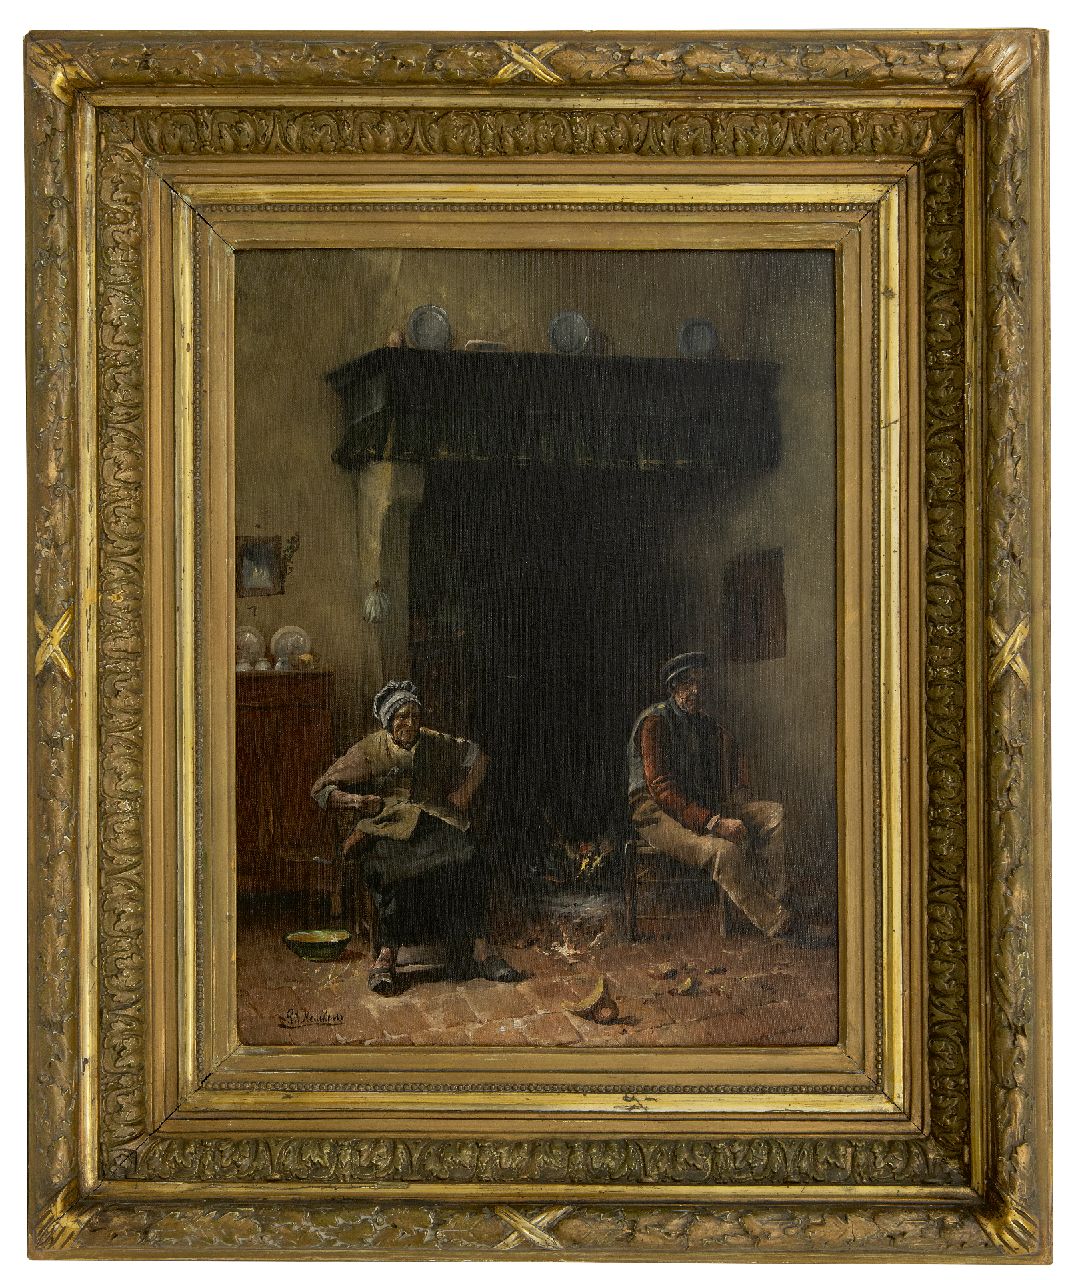 Neuckens P.J.  | Pierre Jules Neuckens | Paintings offered for sale | The broken jar, oil on canvas 48.7 x 39.2 cm, signed l.l.